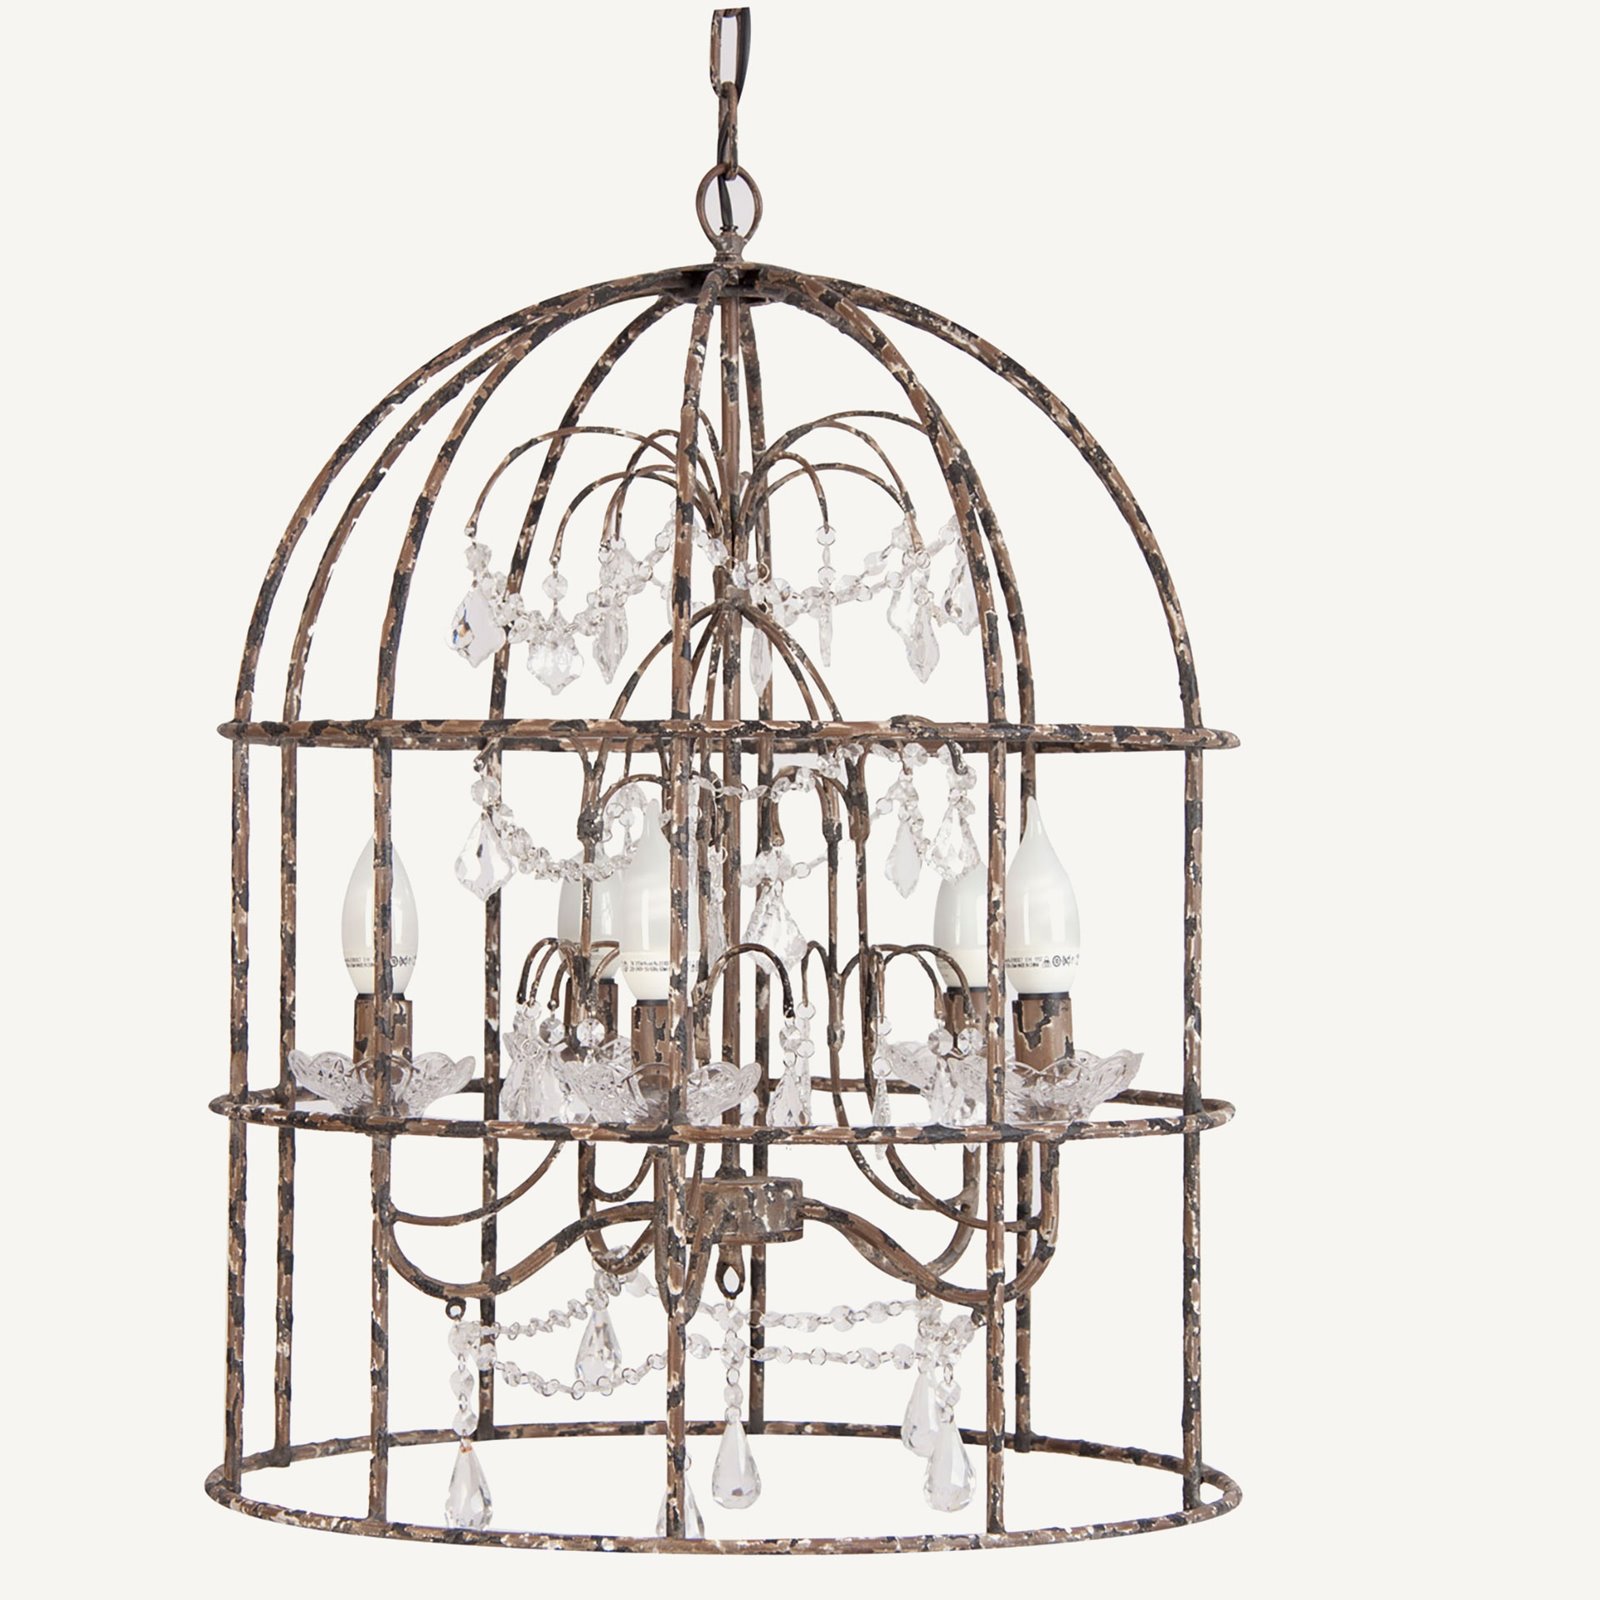 Provence Distressed Domed Pendant Light Image